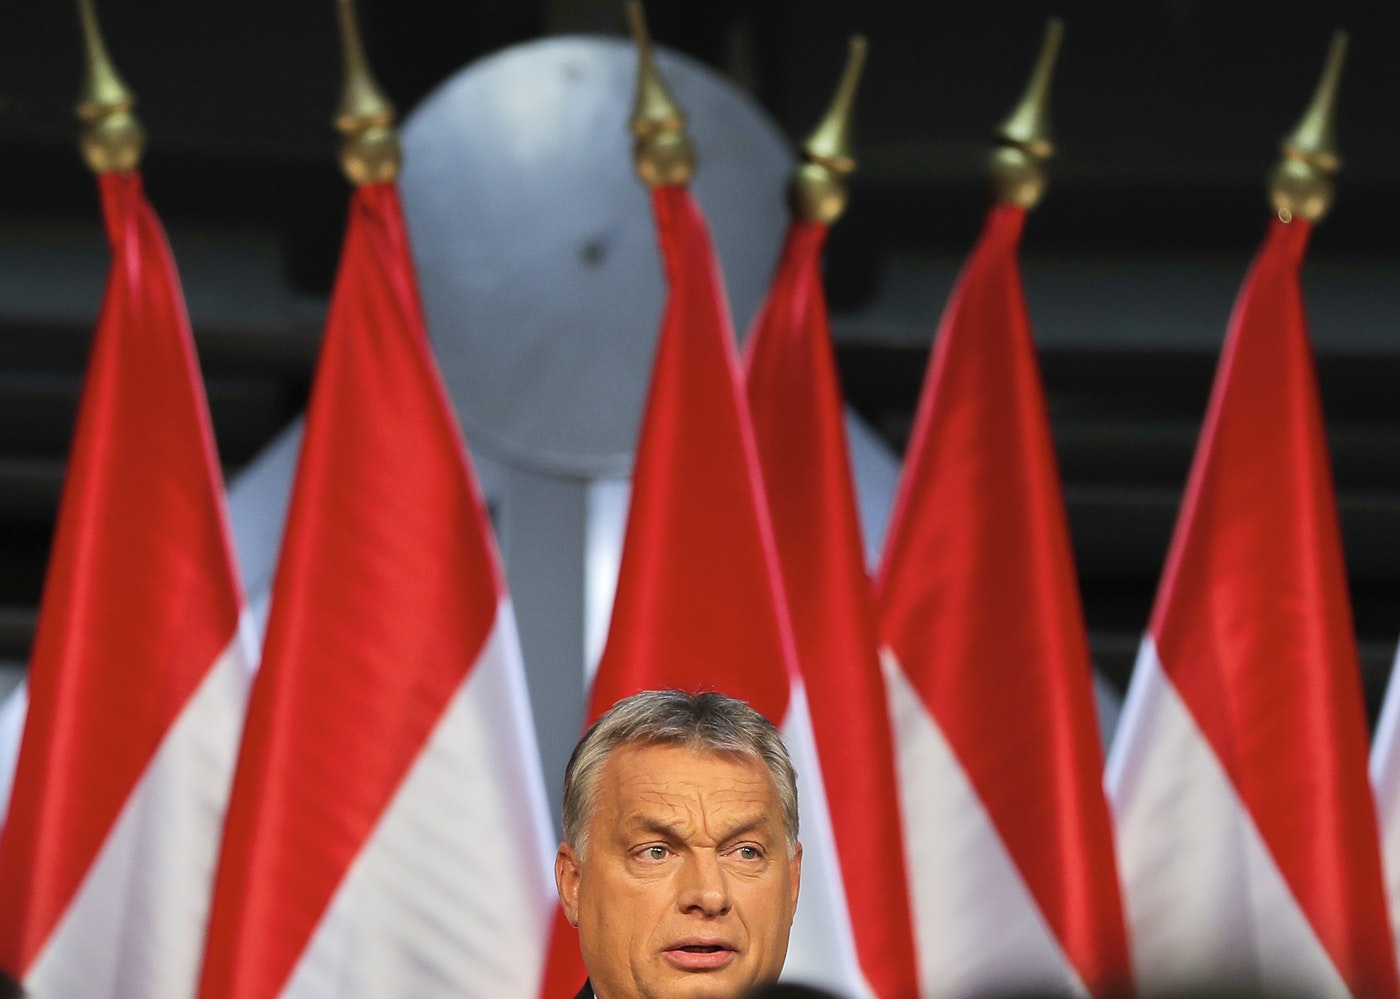 Hungarian premier Viktor Orban looks at supporters before delivering a speech. (AP/Vadim Ghirda)